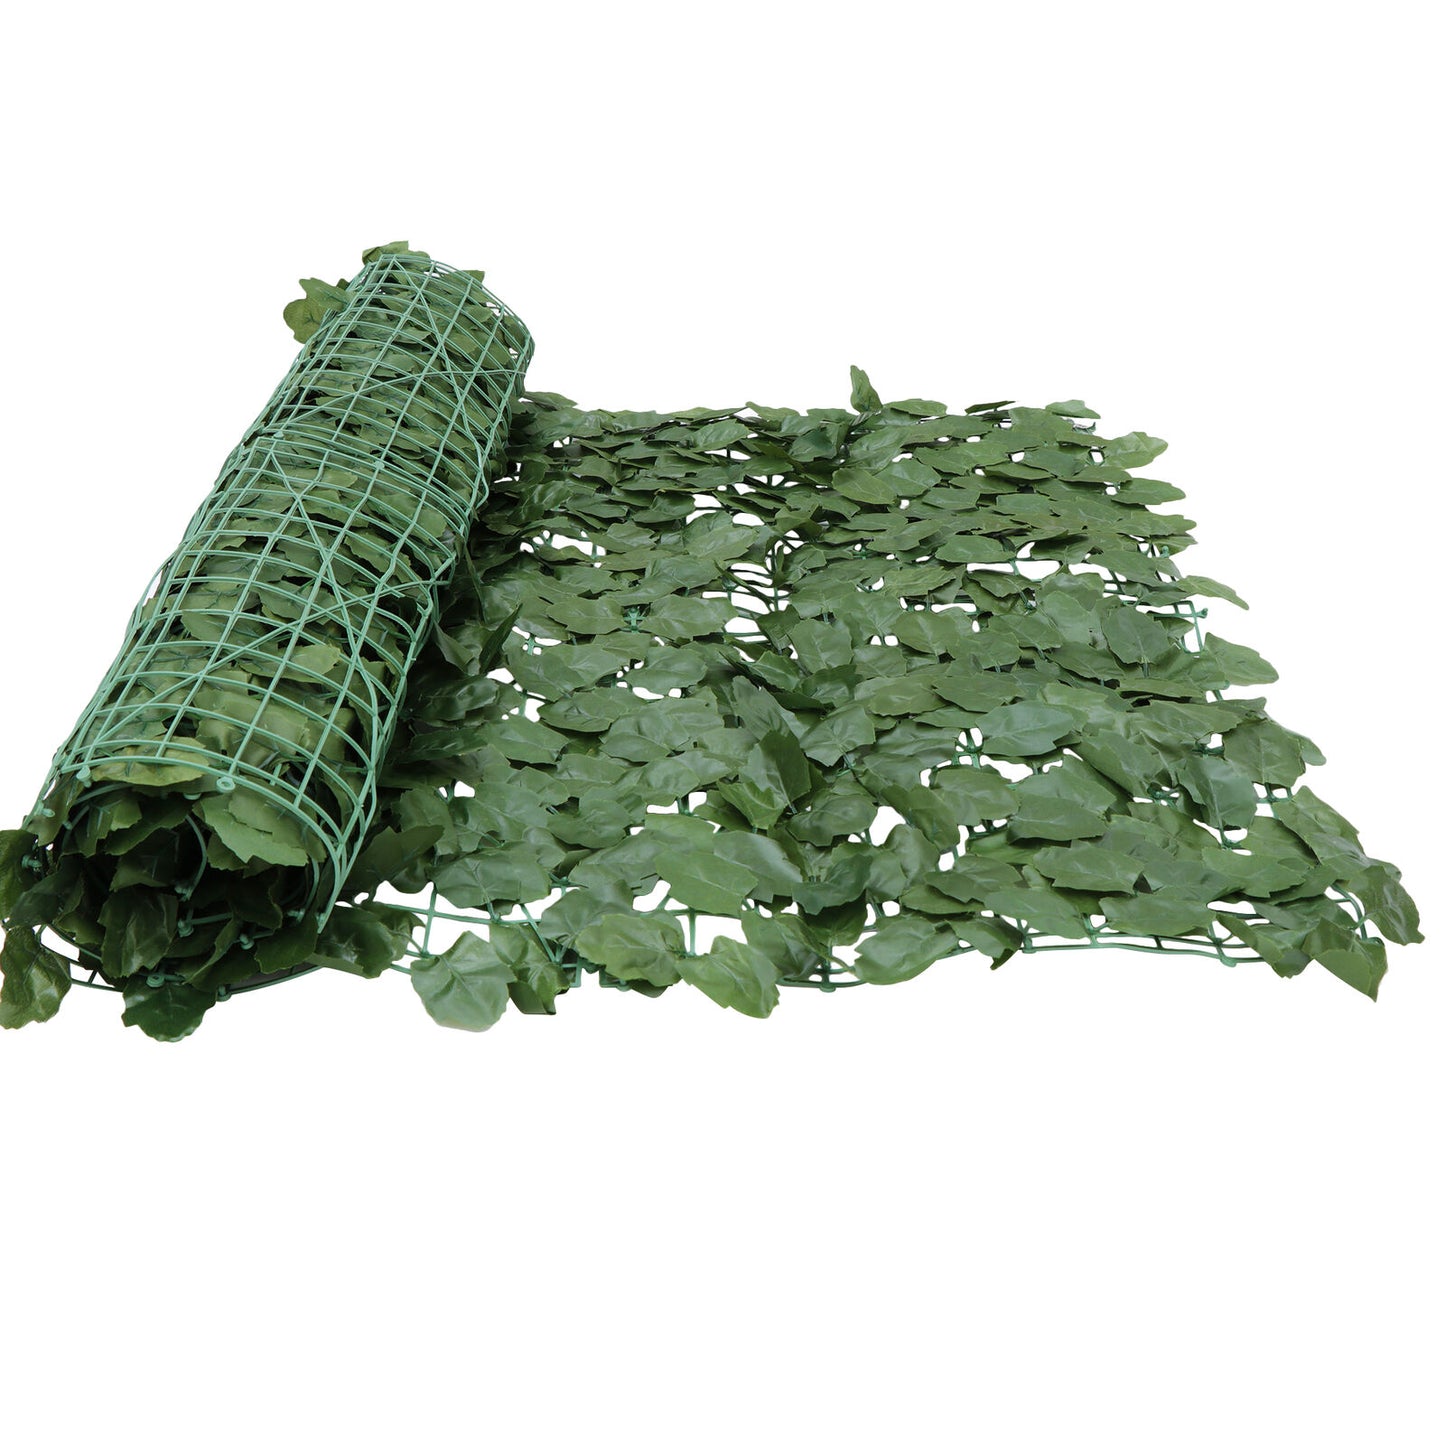 Artificial 39" x 98" Faux Ivy Leaf Decorative Privacy Fence Screen Hedge Fencing